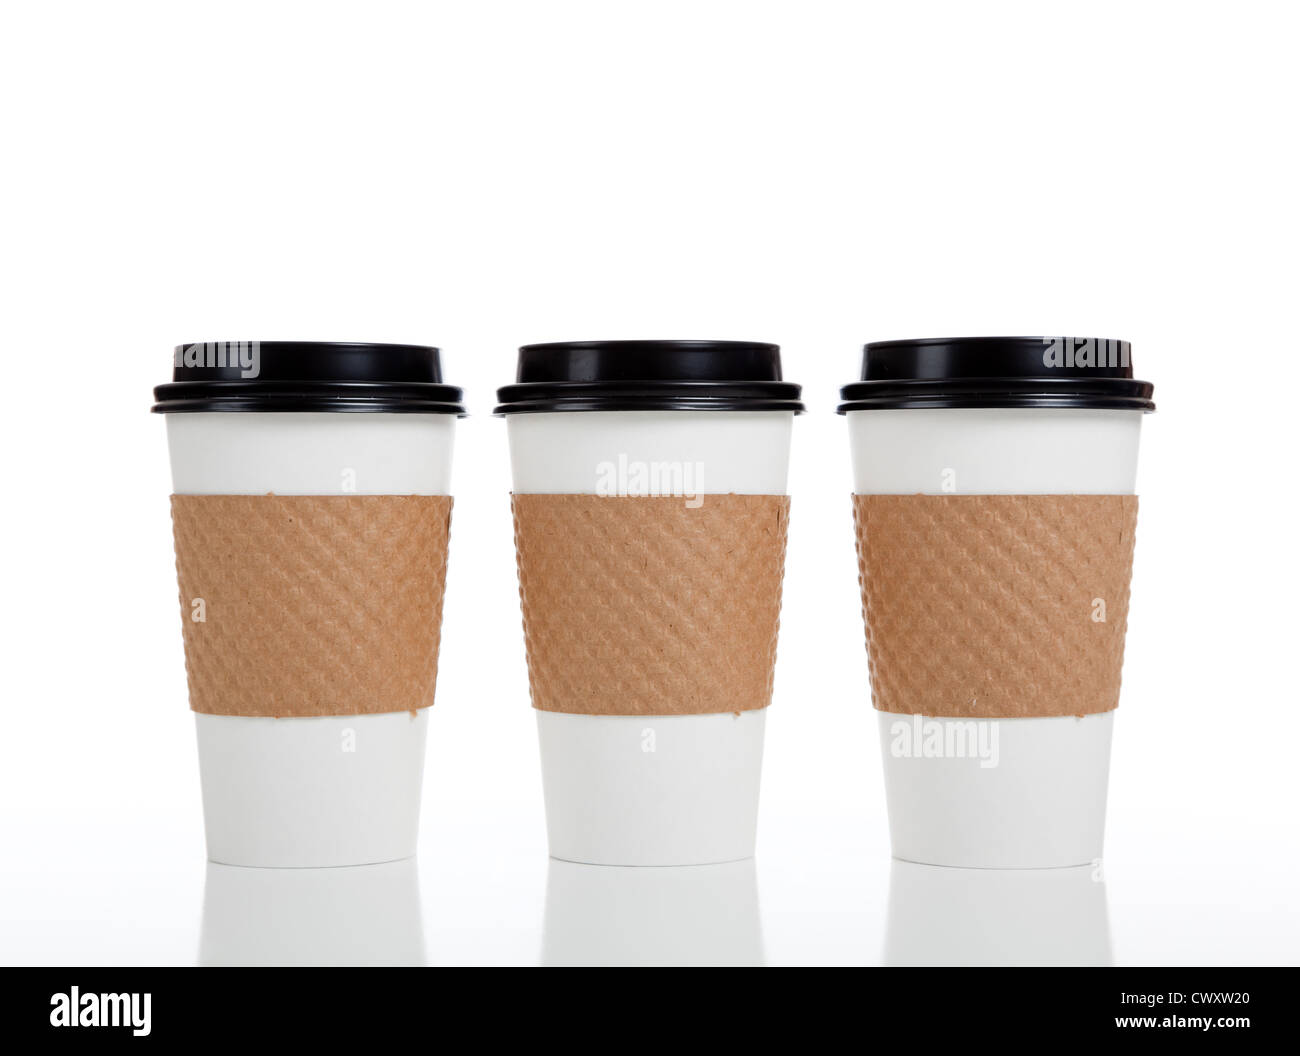 black disposable coffee cups with lids